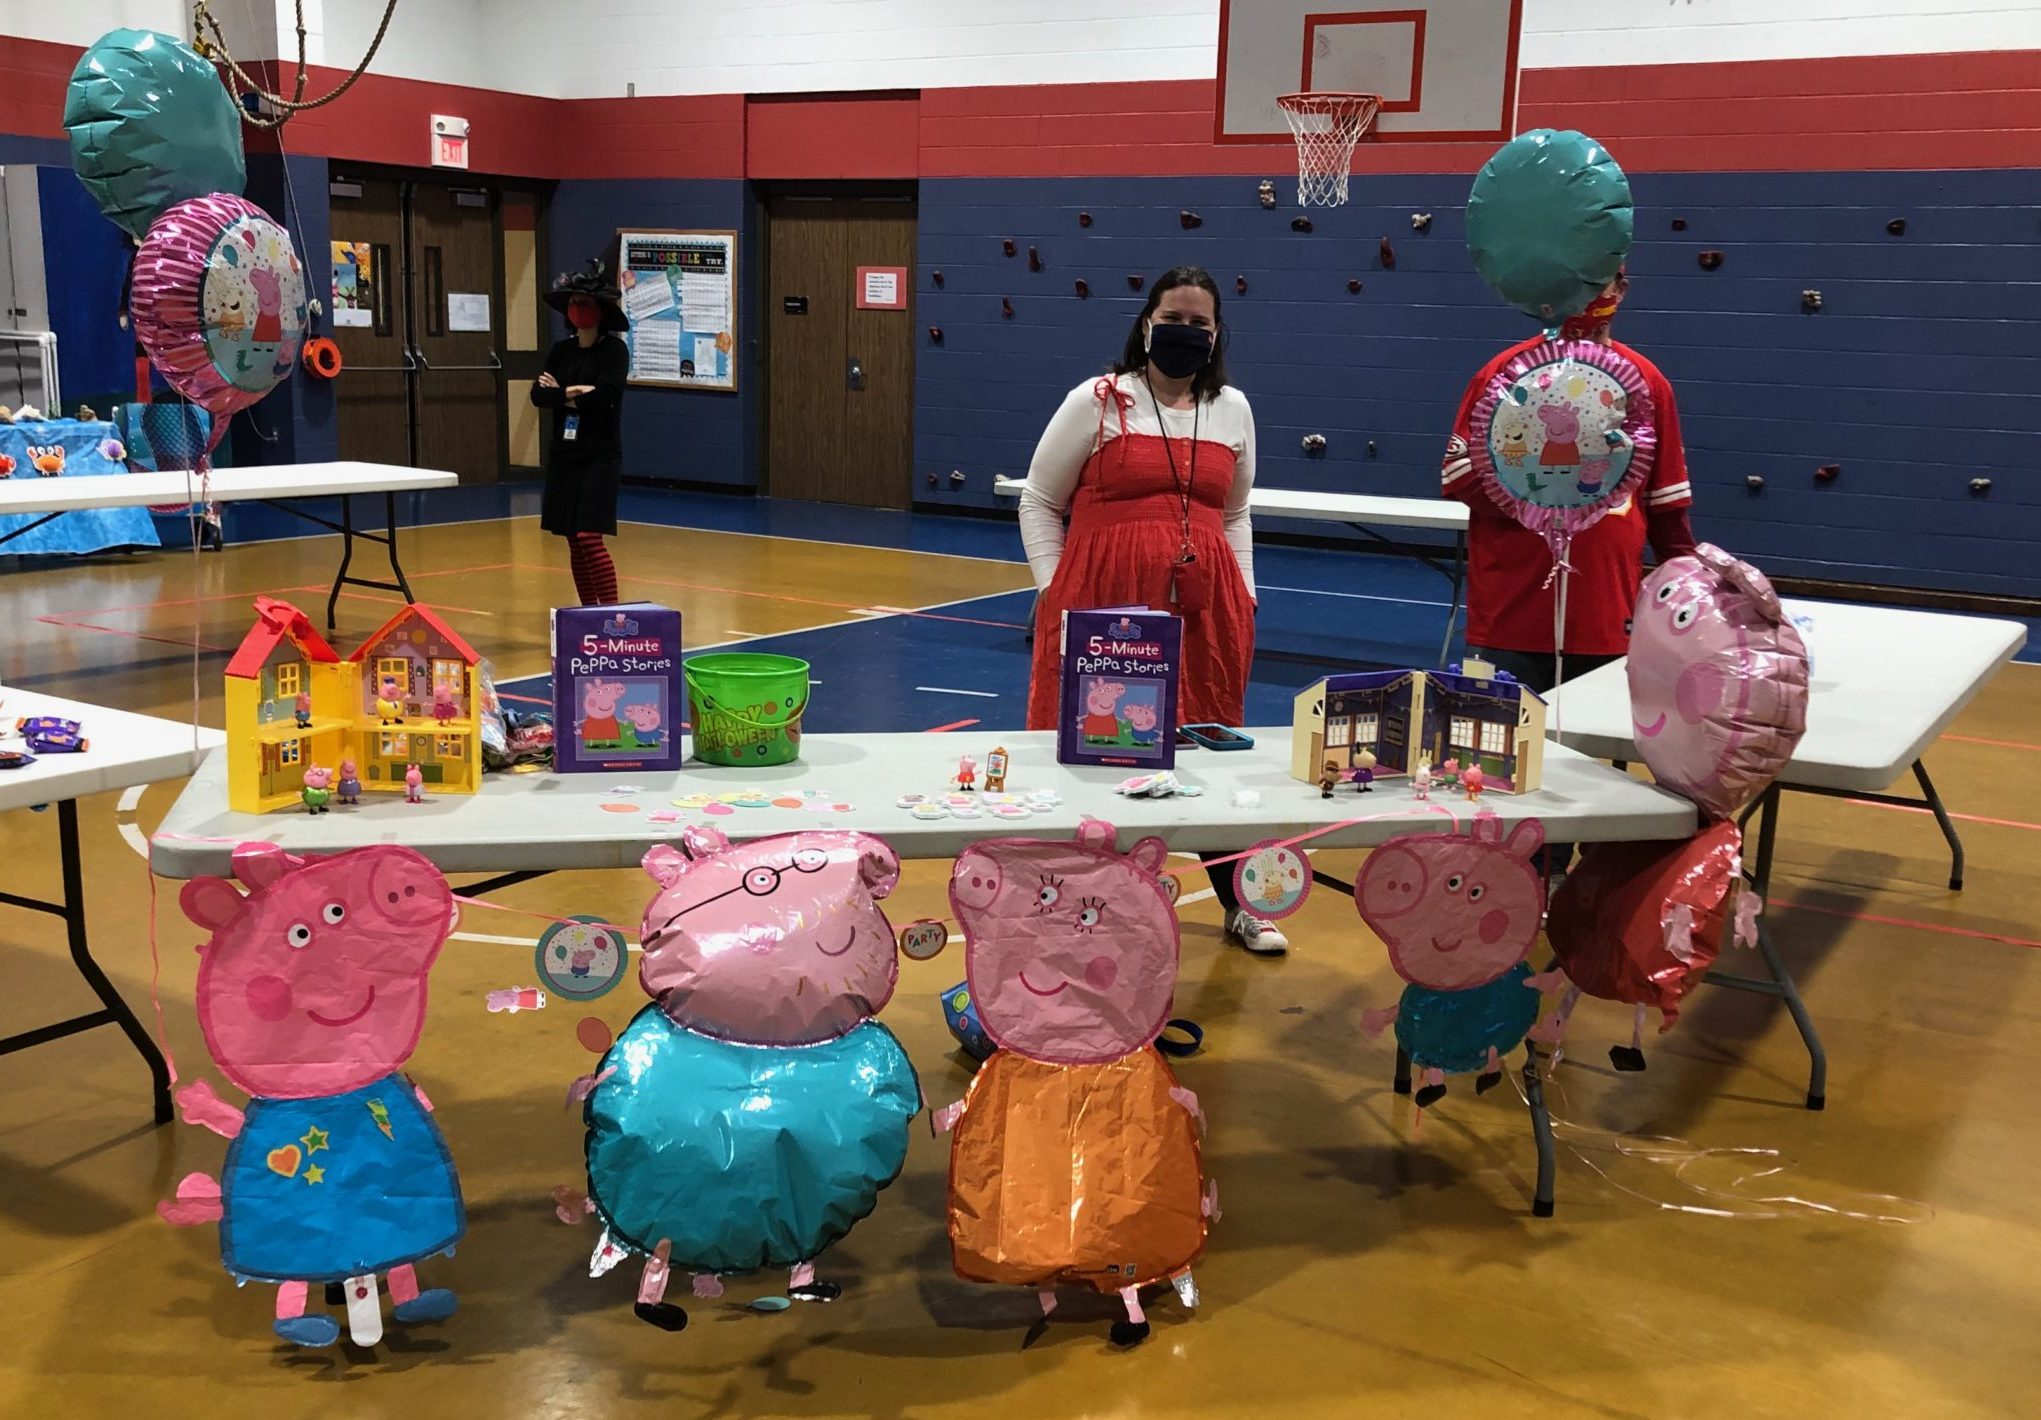 Ms. Hillary's and her table decorated with Peppa Pig balloons and items